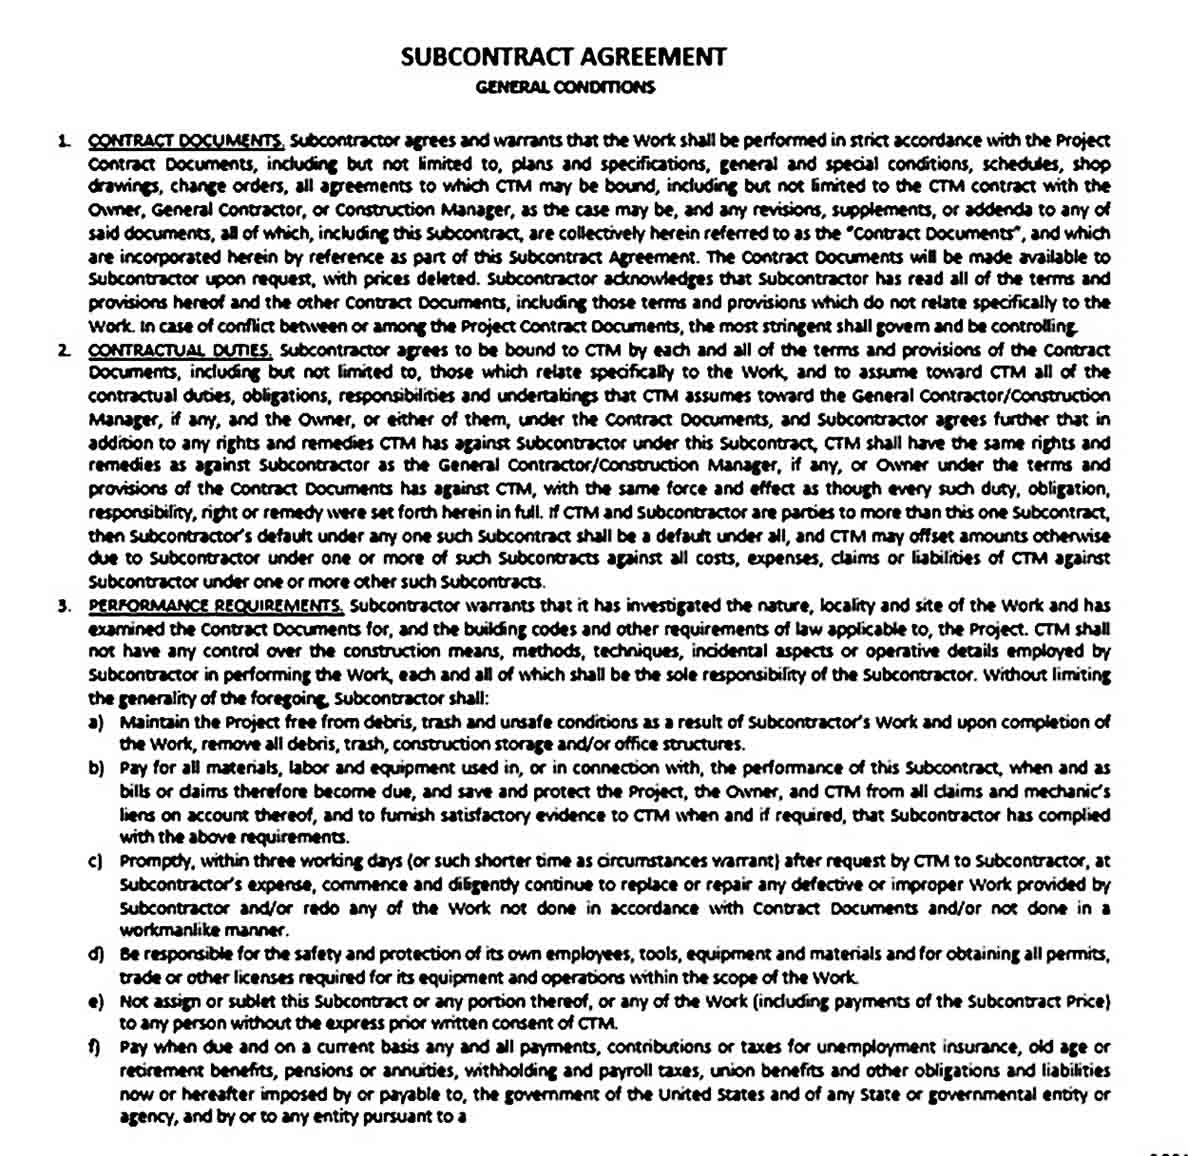 Standard Subcontract Agreement